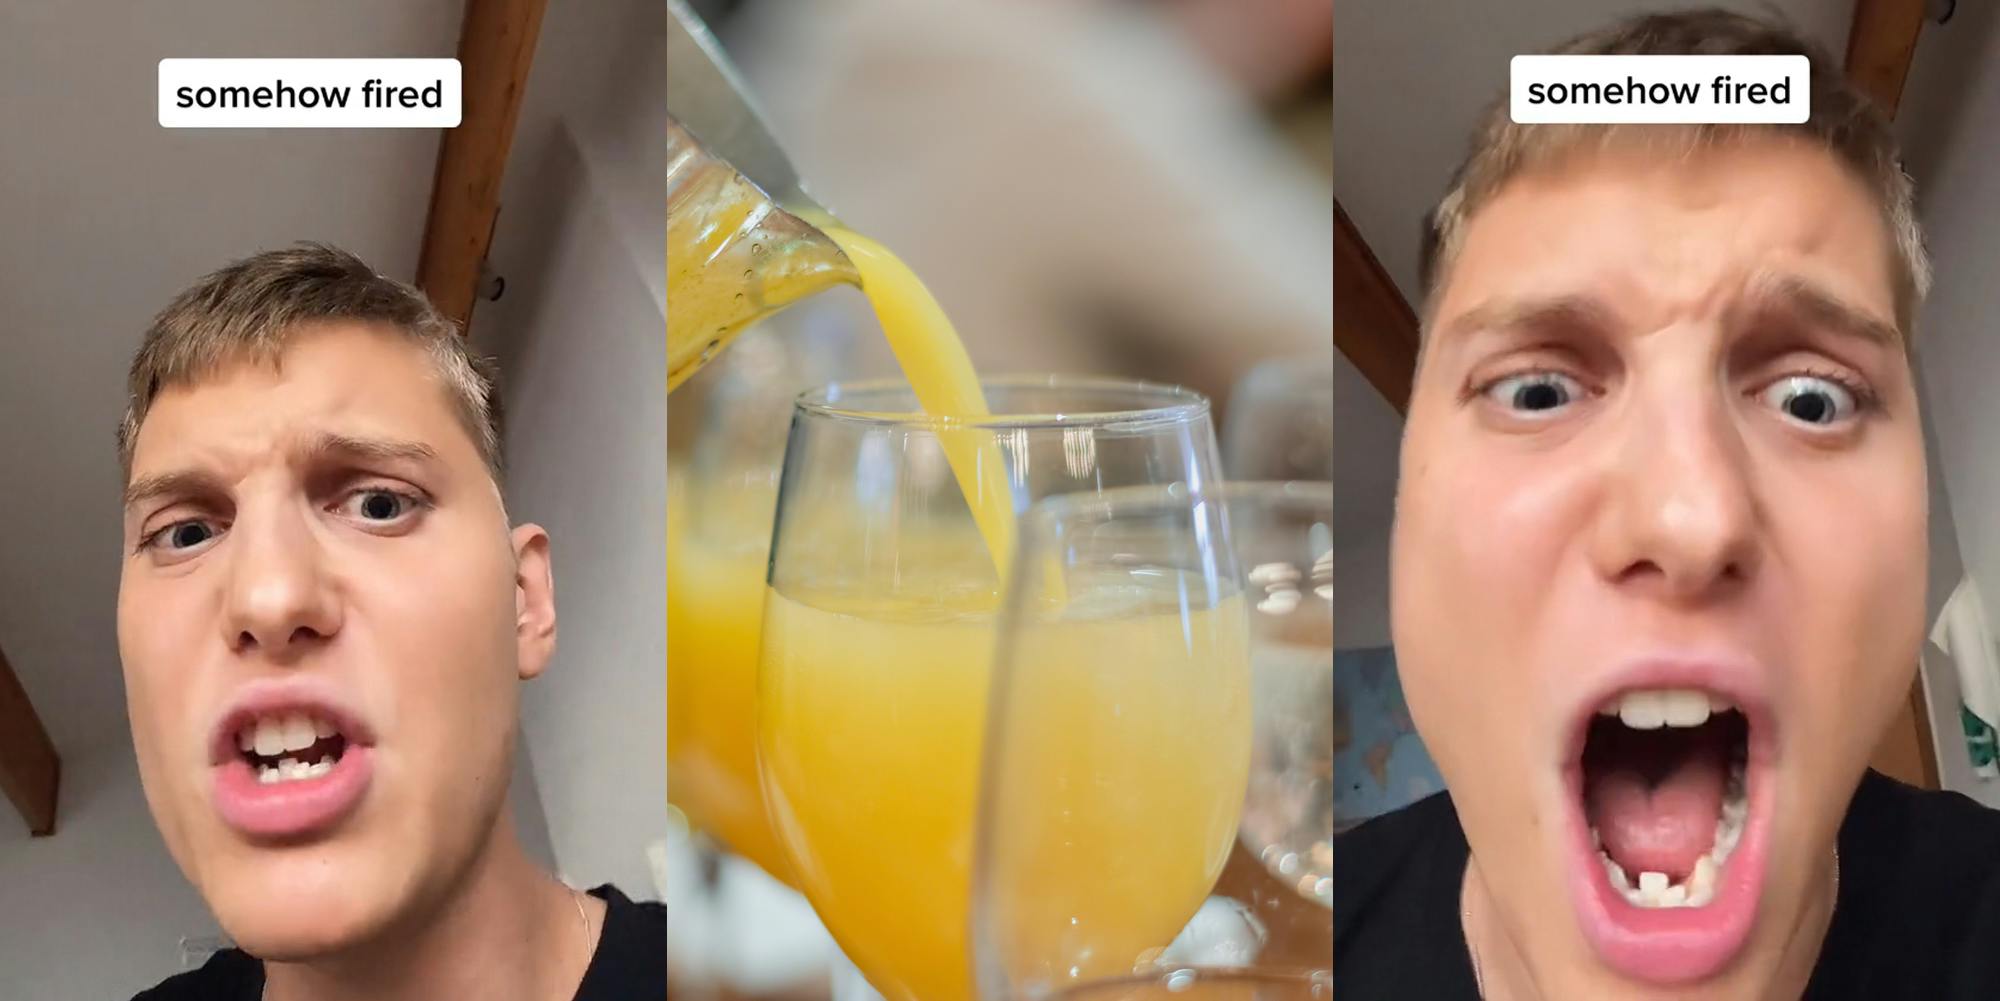 man speaking with caption "somehow fired" (l) jug pouring mimosa drink into glass cup (c) man speaking with caption "somehow fired" (r)